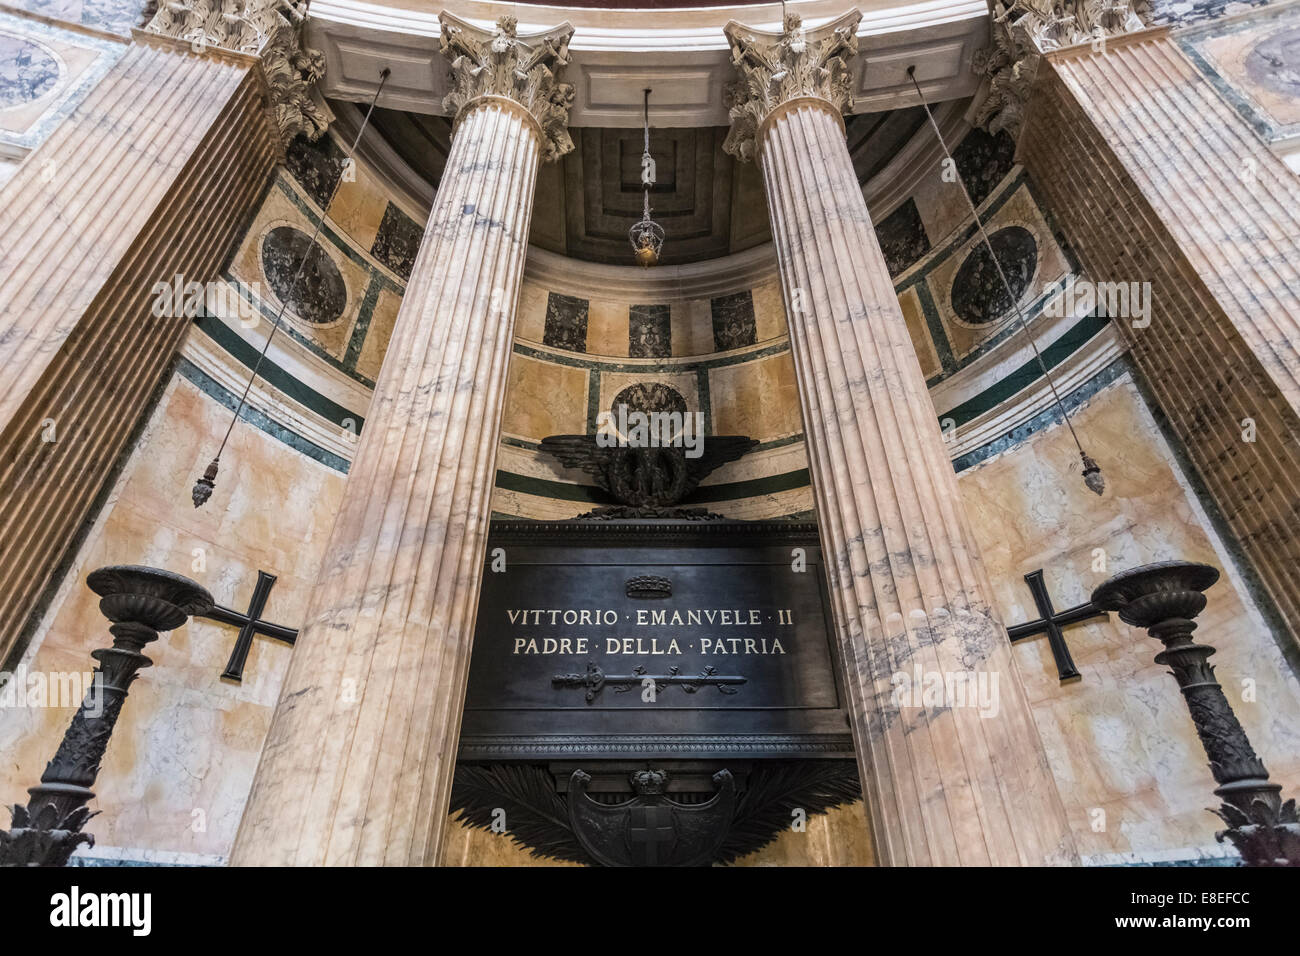 The Tomb of Victor Emanuel II (Vittorio Emanuele II), inside the Pantheon in Rome, Italy Stock Photo